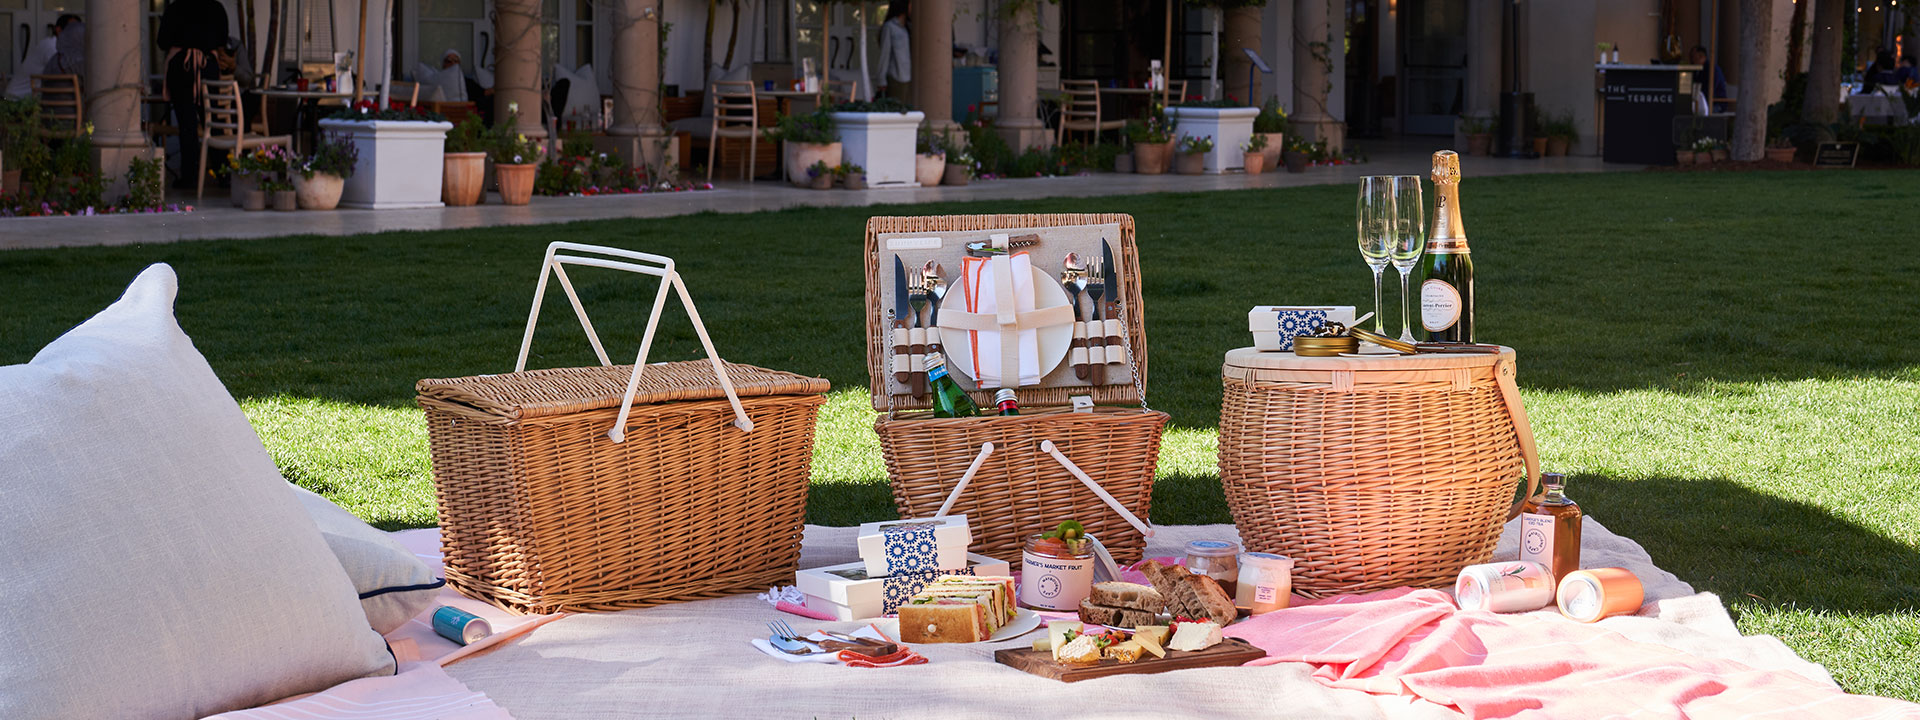 Picnic food laid out in front of wicker basket with glasses of champagne, fresh produce and light snacks on a blanket